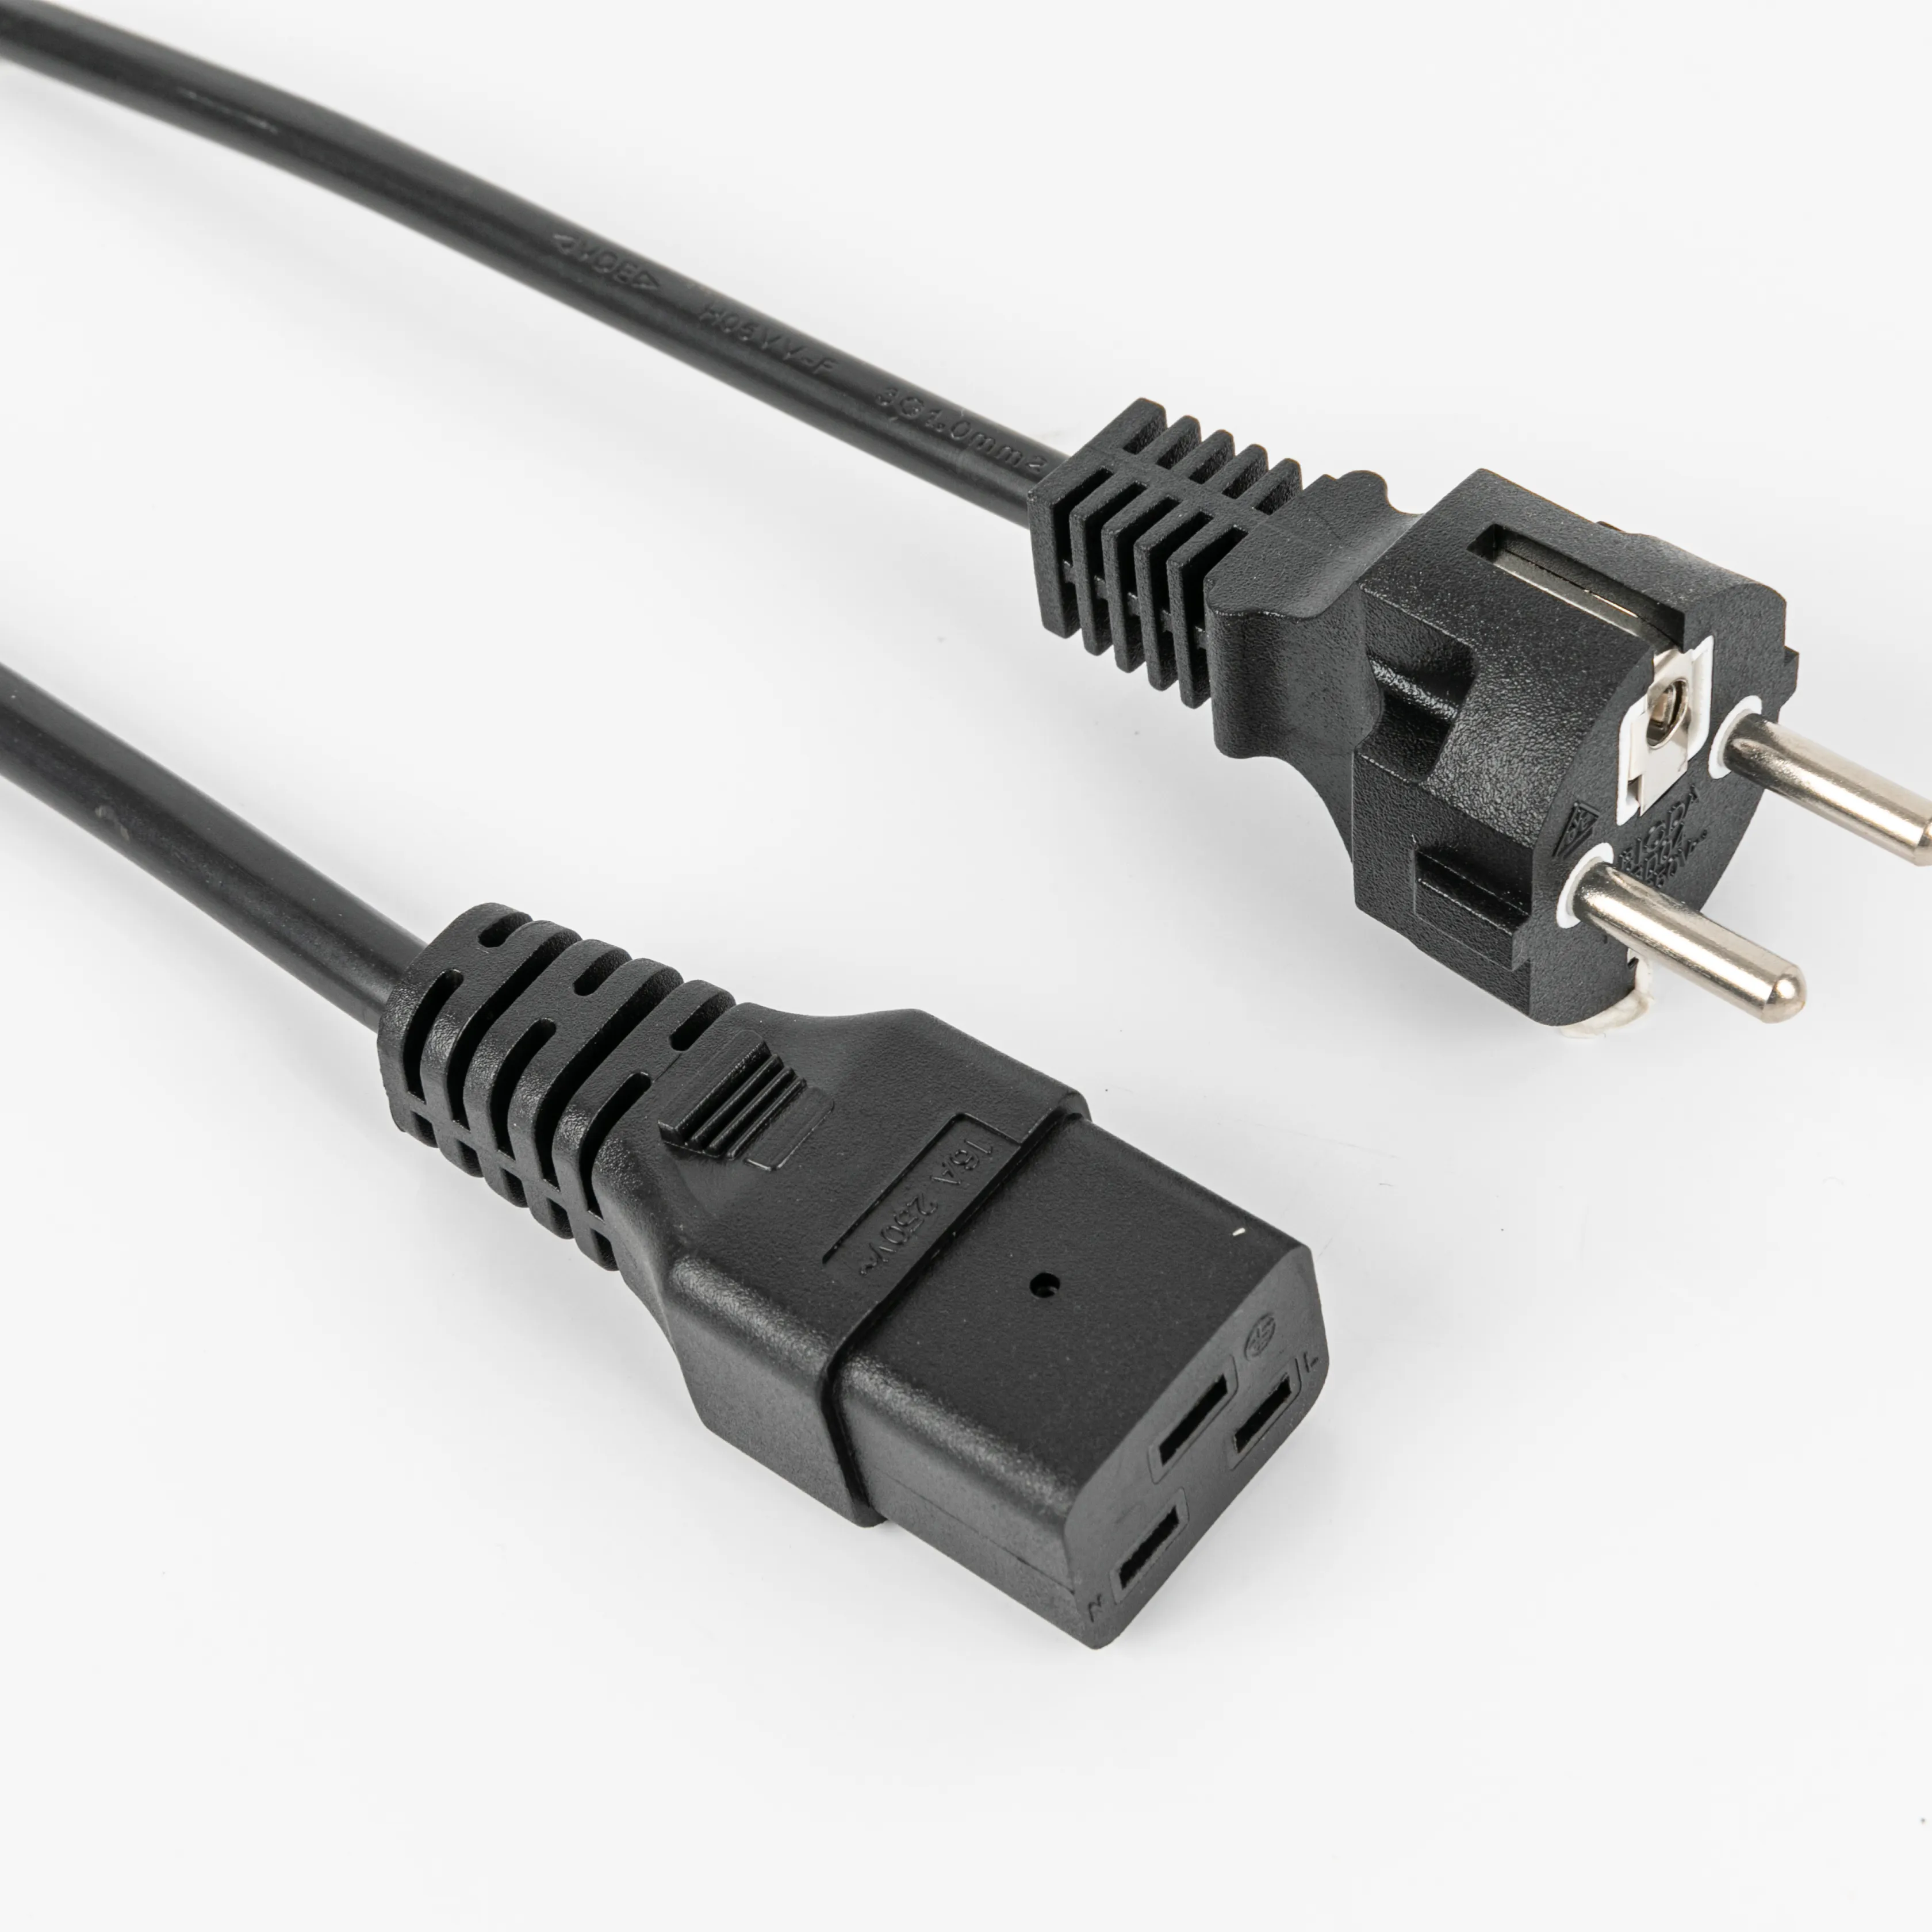 PVC System Micro Inverter AC Power Cord Schuko Plug to LY01 Connector with H07RN-F Rubber Cable for New Model